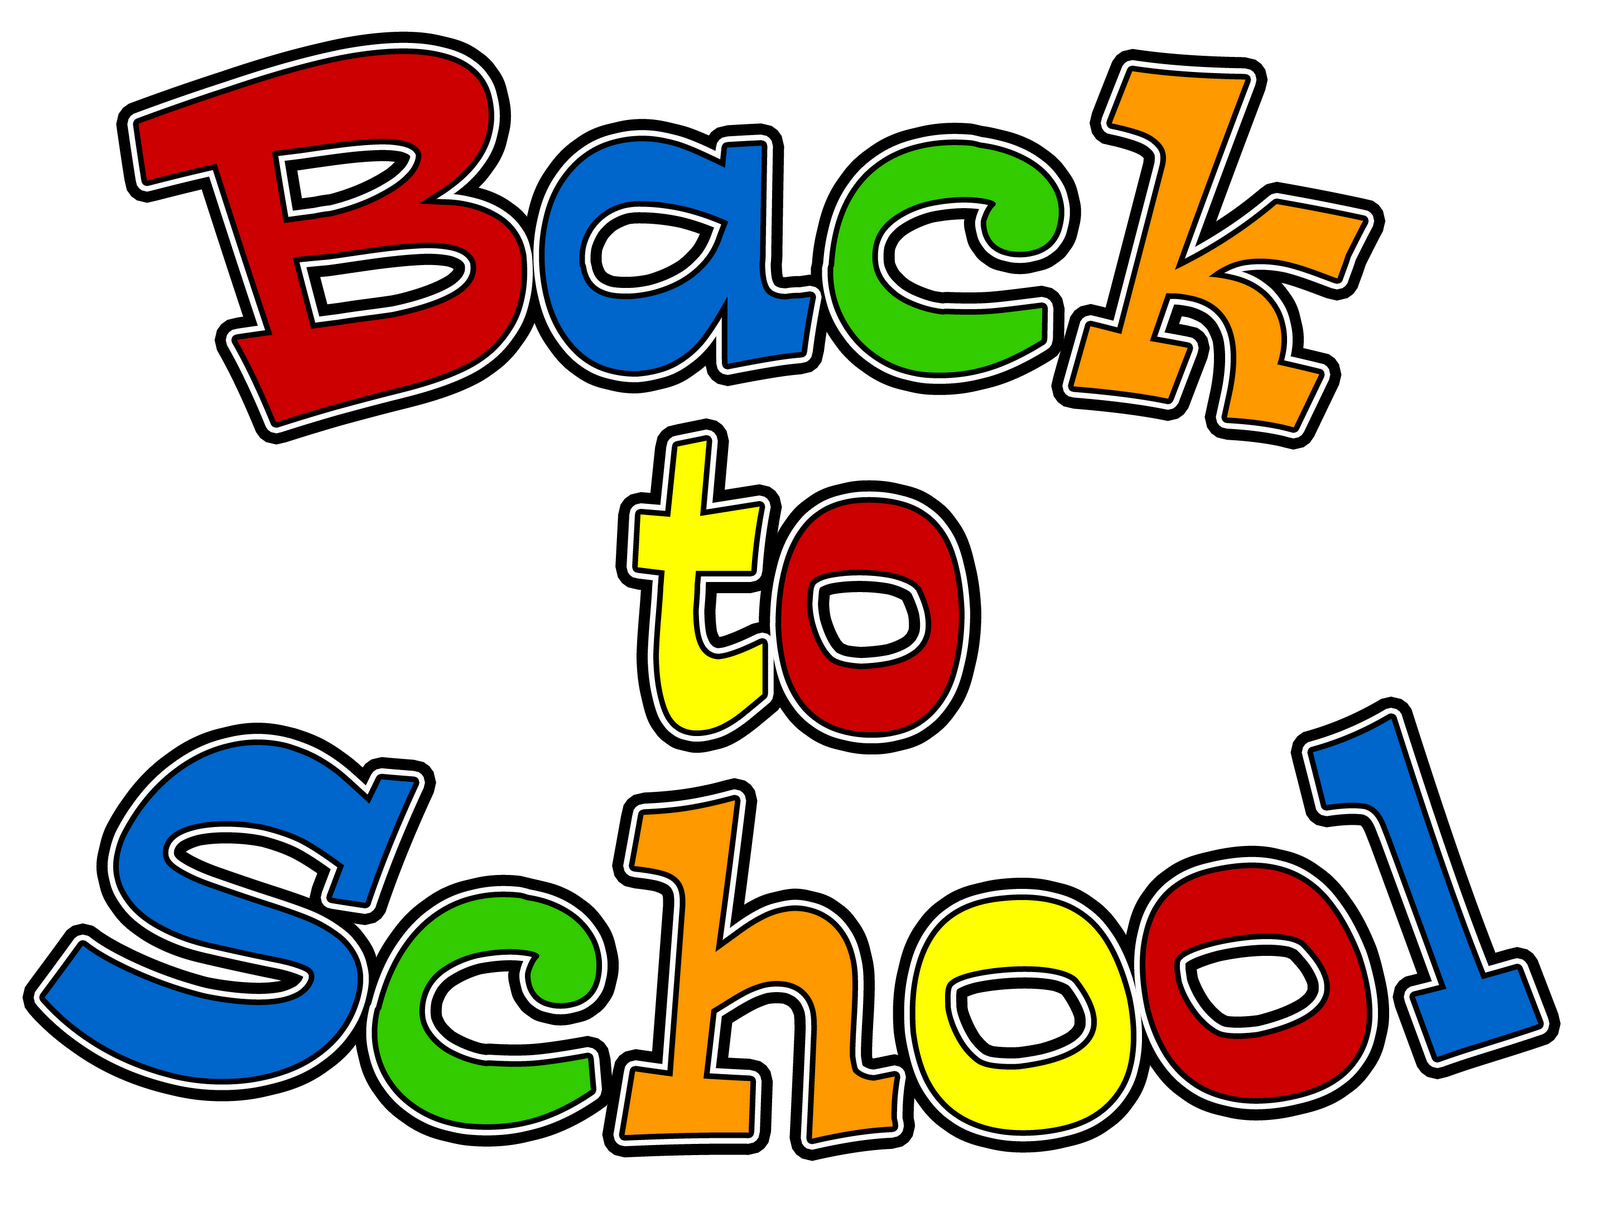 First Day Of School Clipart & First Day Of School Clip Art Images.